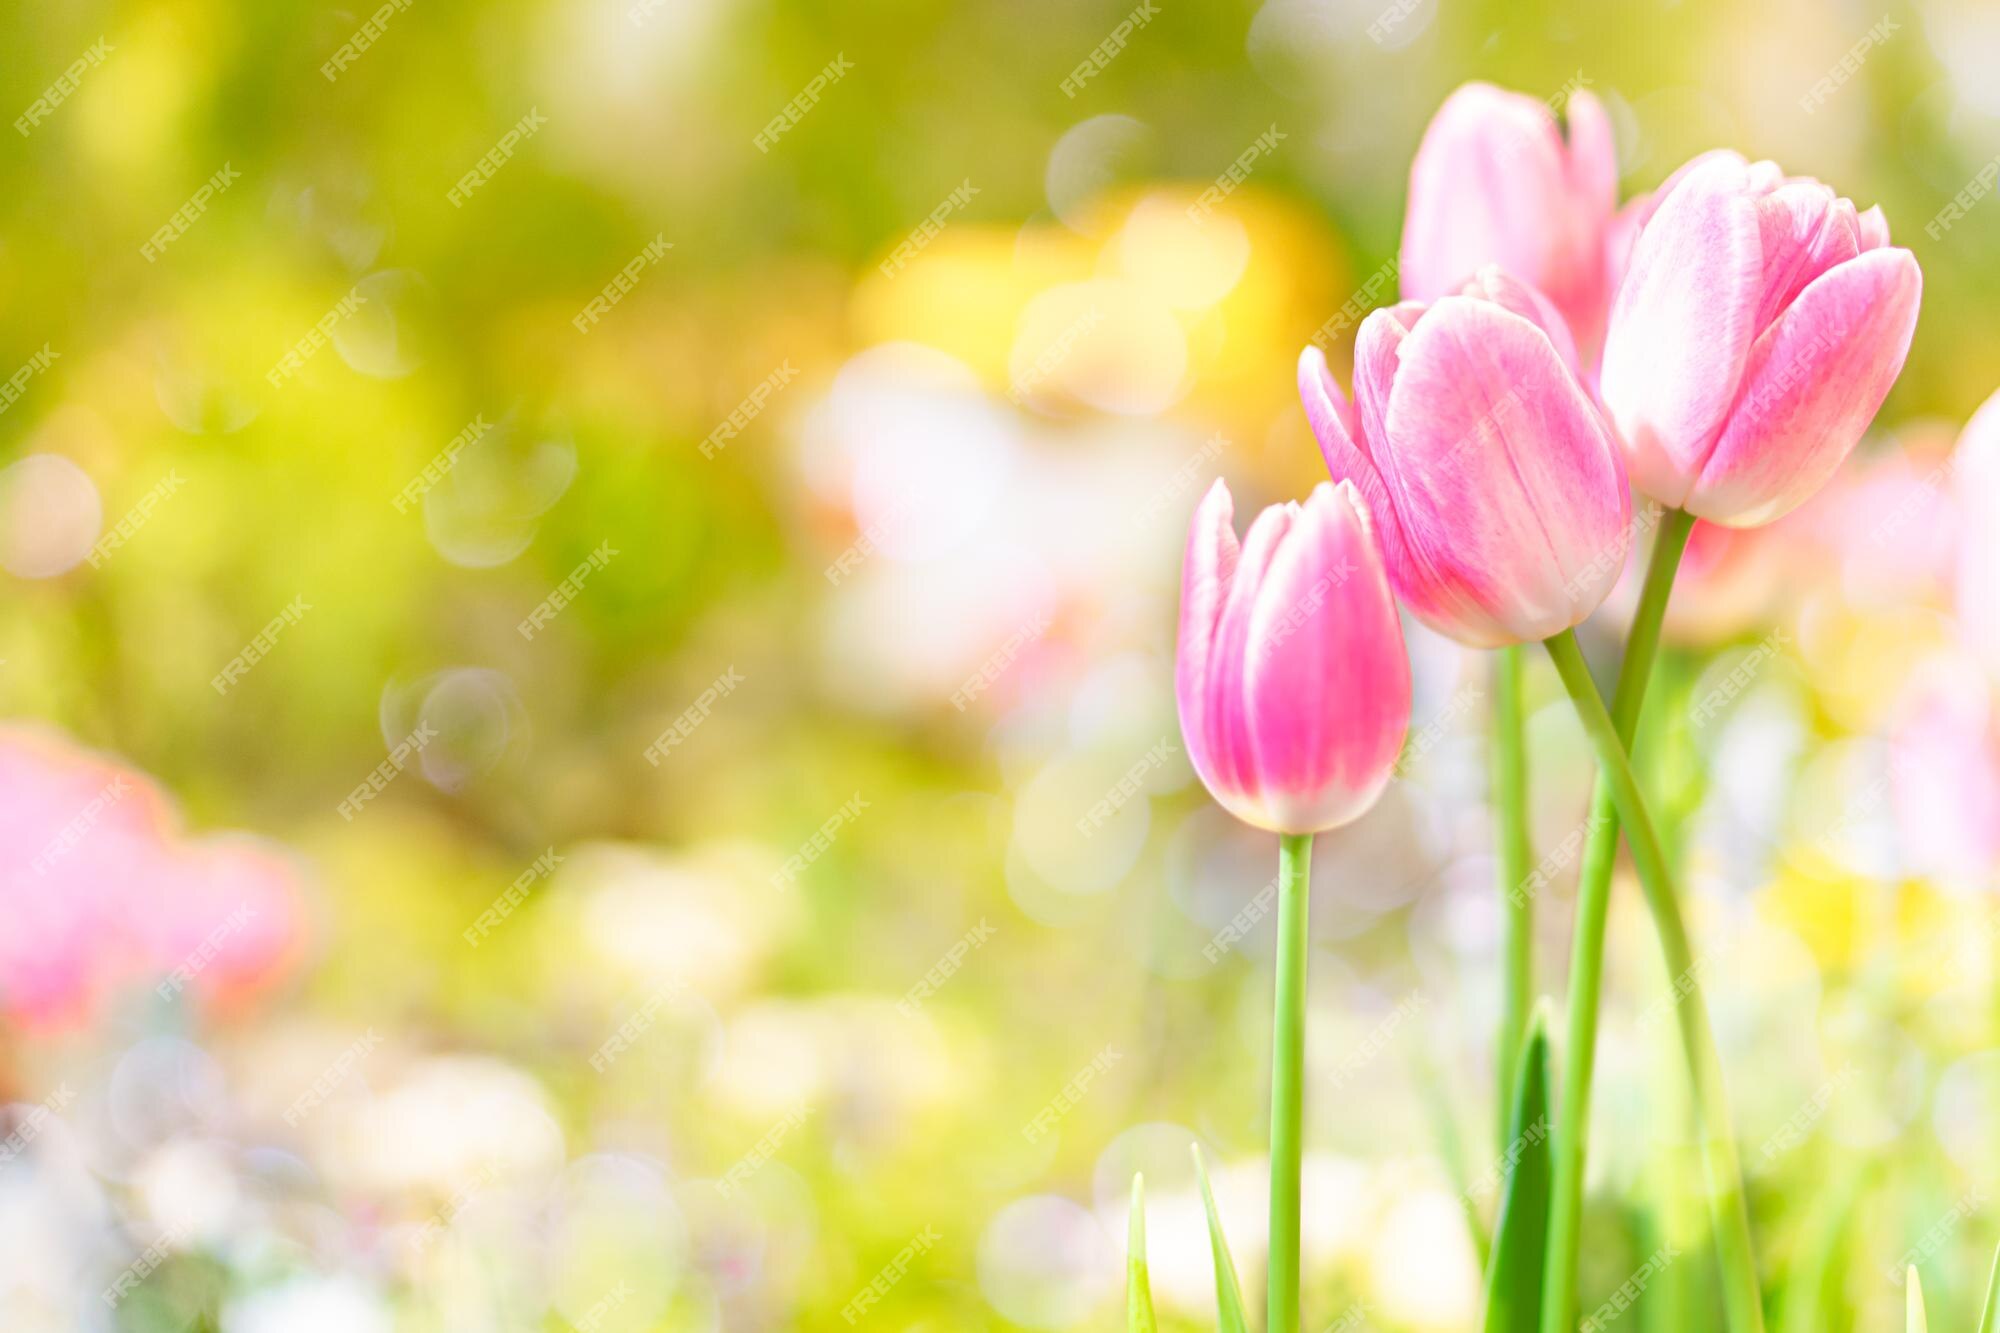 Premium Photo | Tulip flowers shallow selective focus spring nature  background for web banner and card design